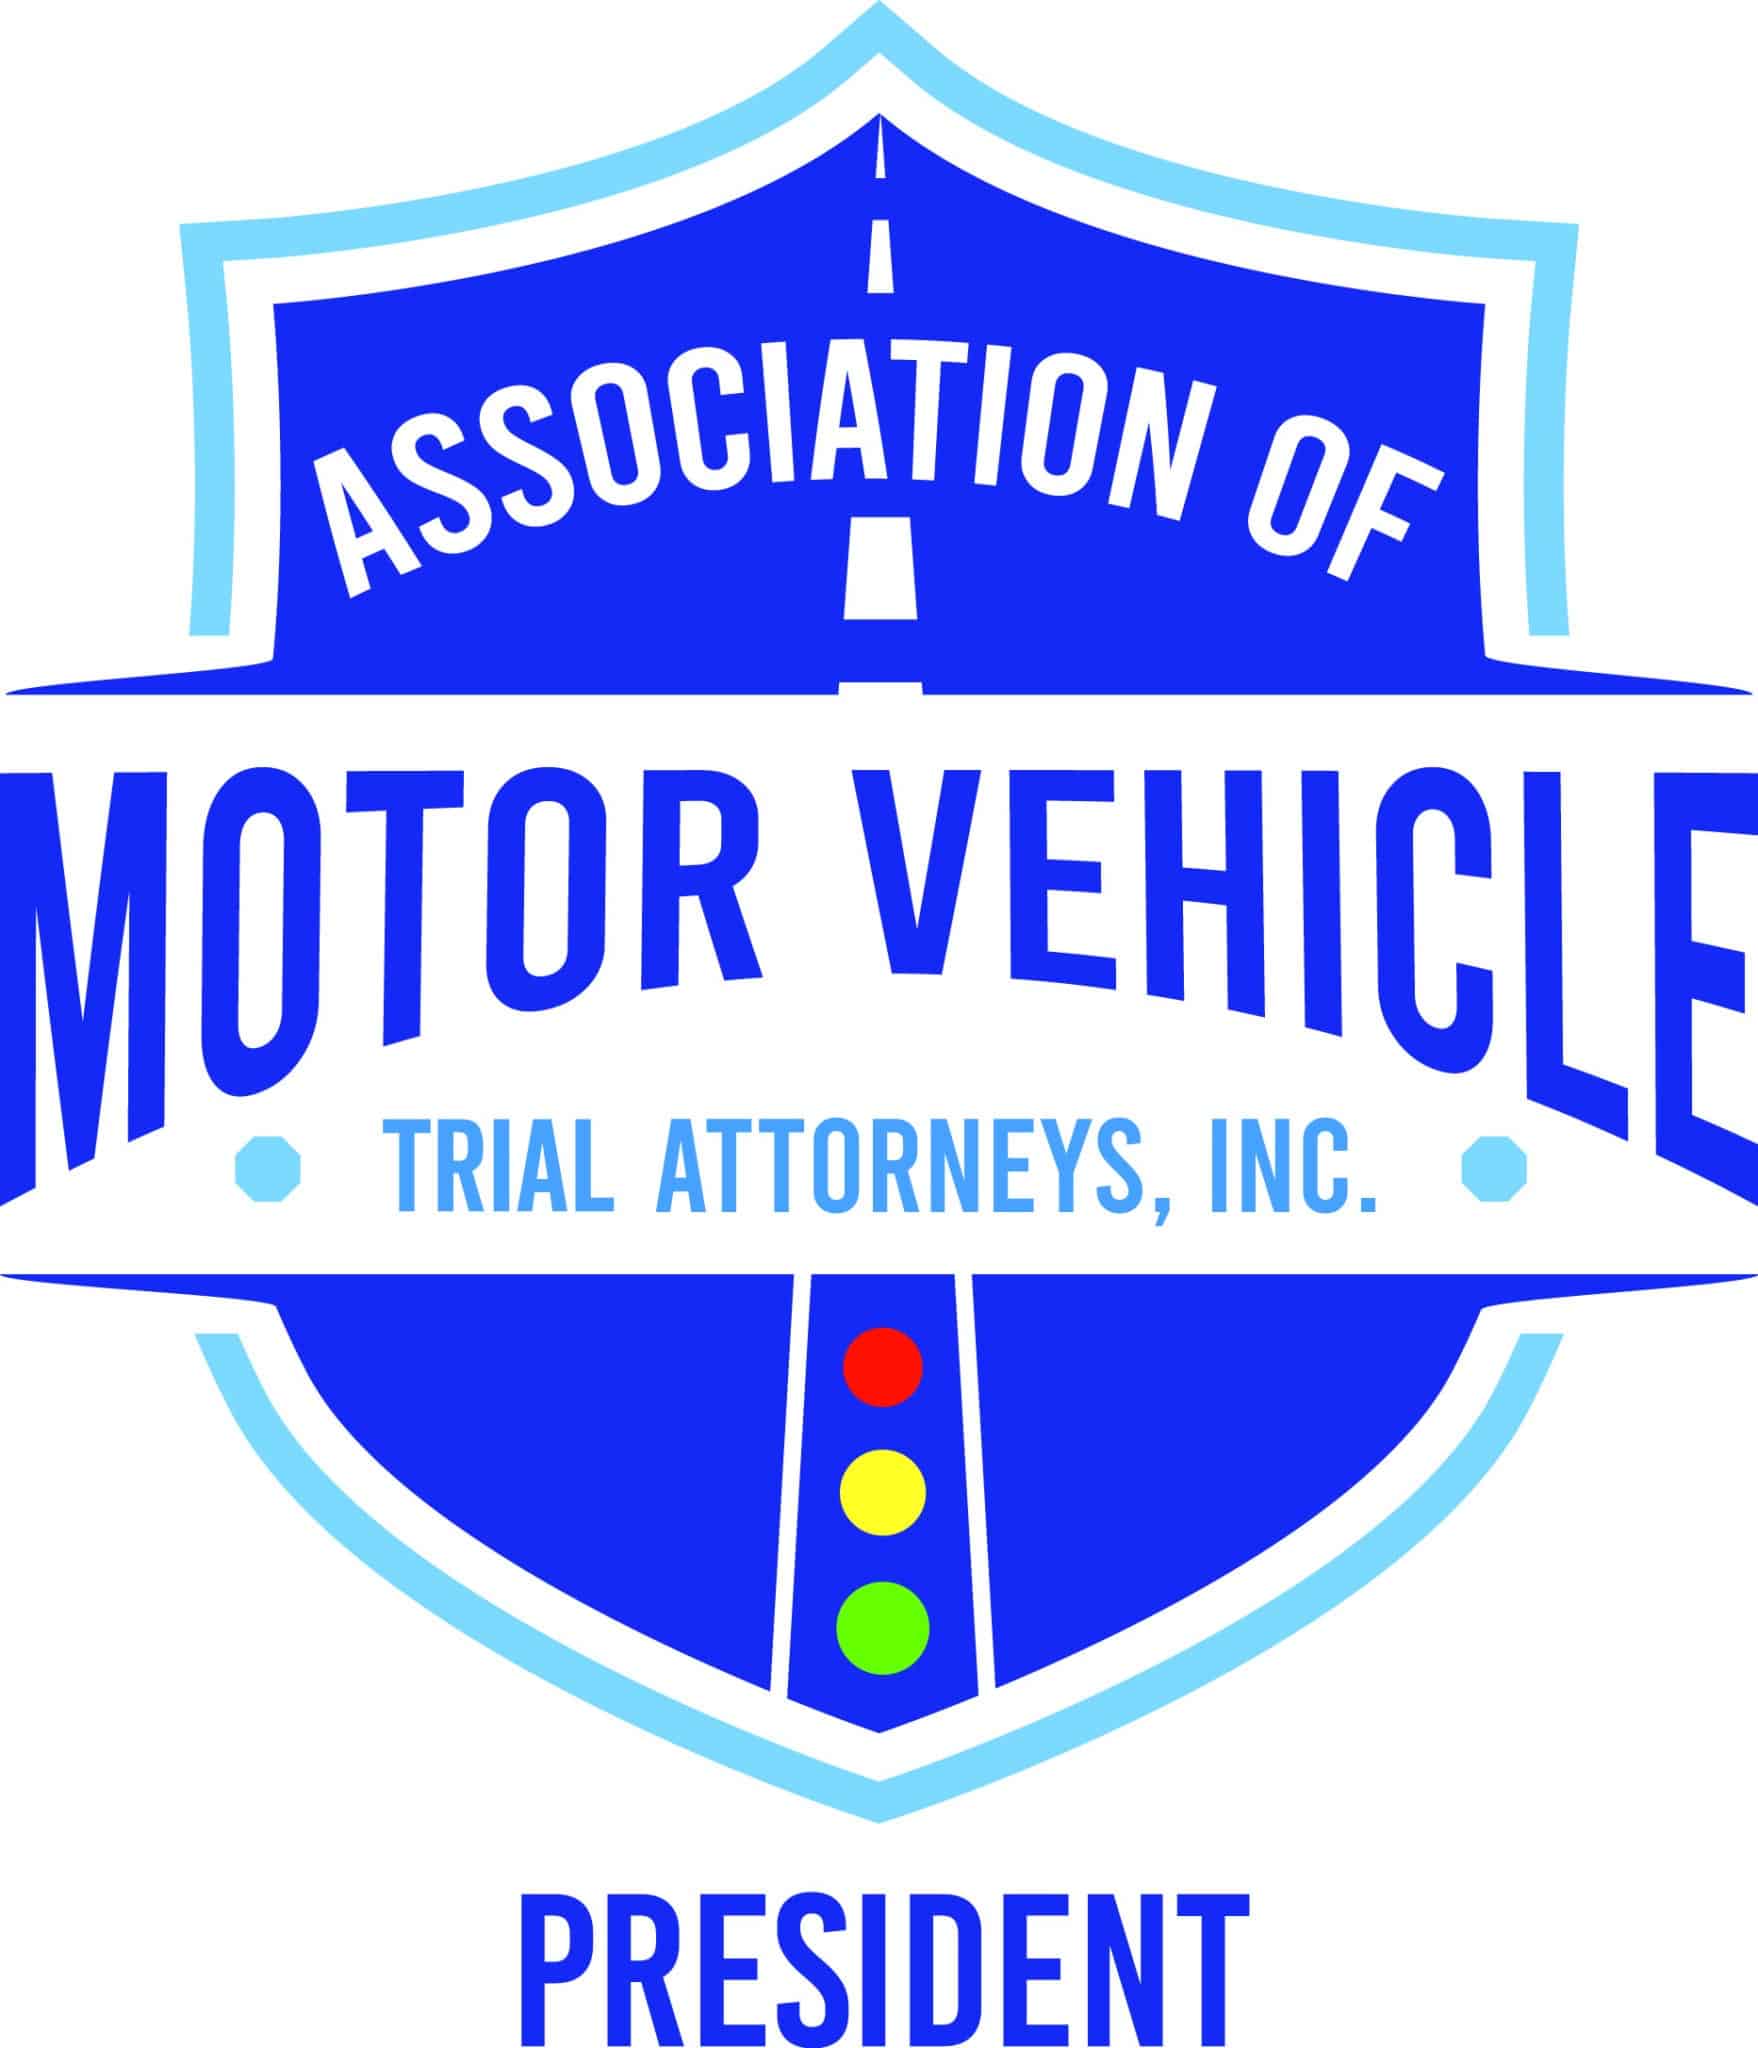 President of the Association of Motor Vehicle Trial Attorneys, Inc